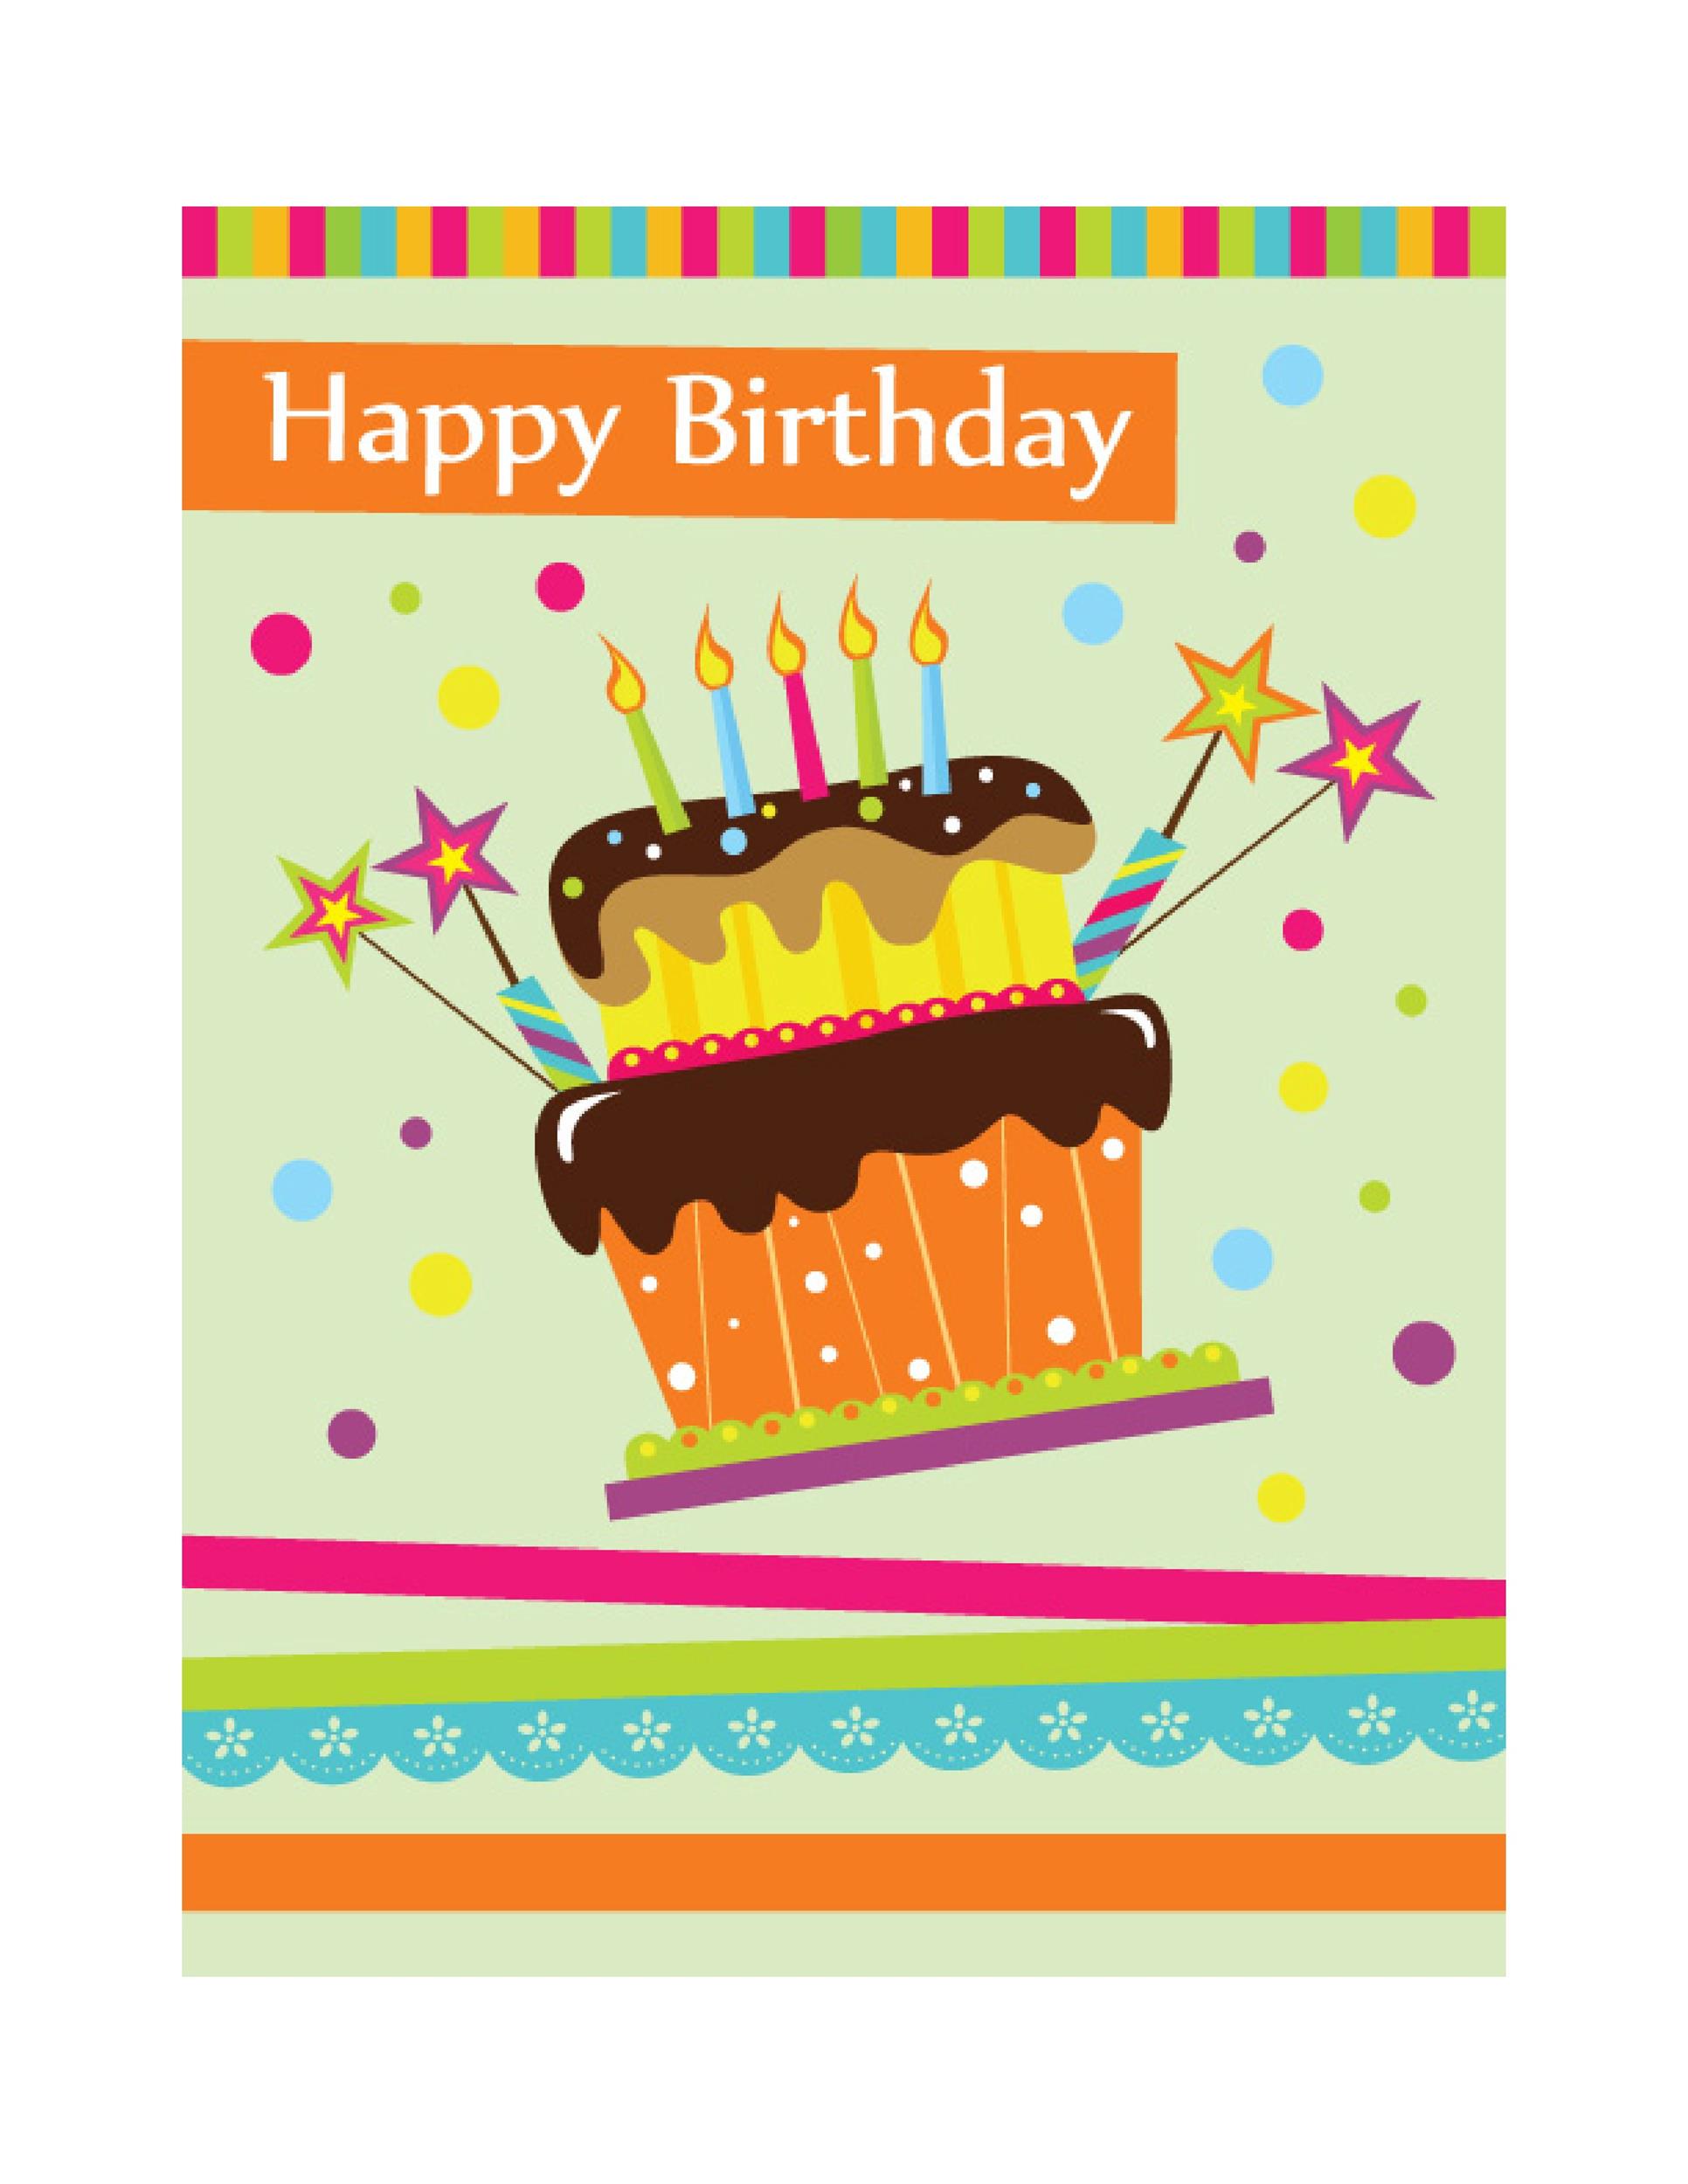 Free Printable Birthday Cards For Her Pdf